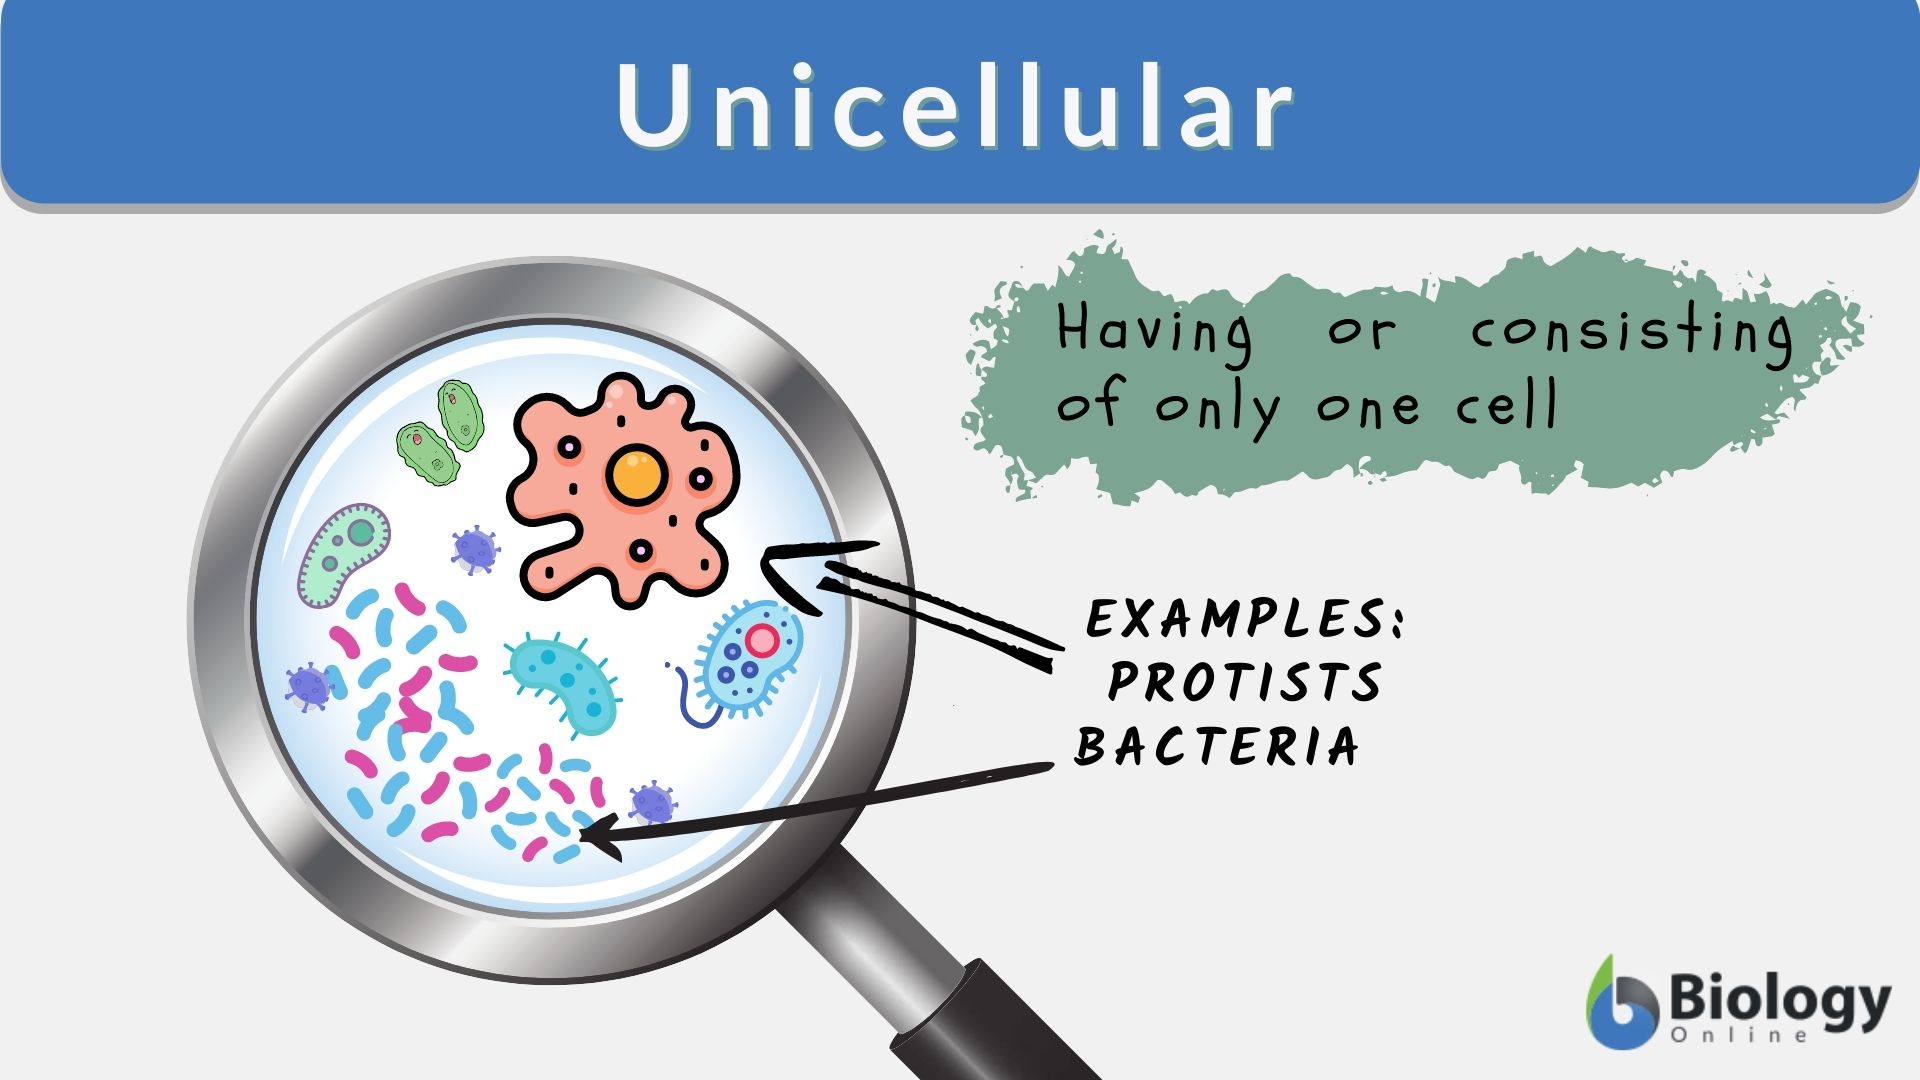 Unicellular Definition and Examples - Biology Online Dictionary